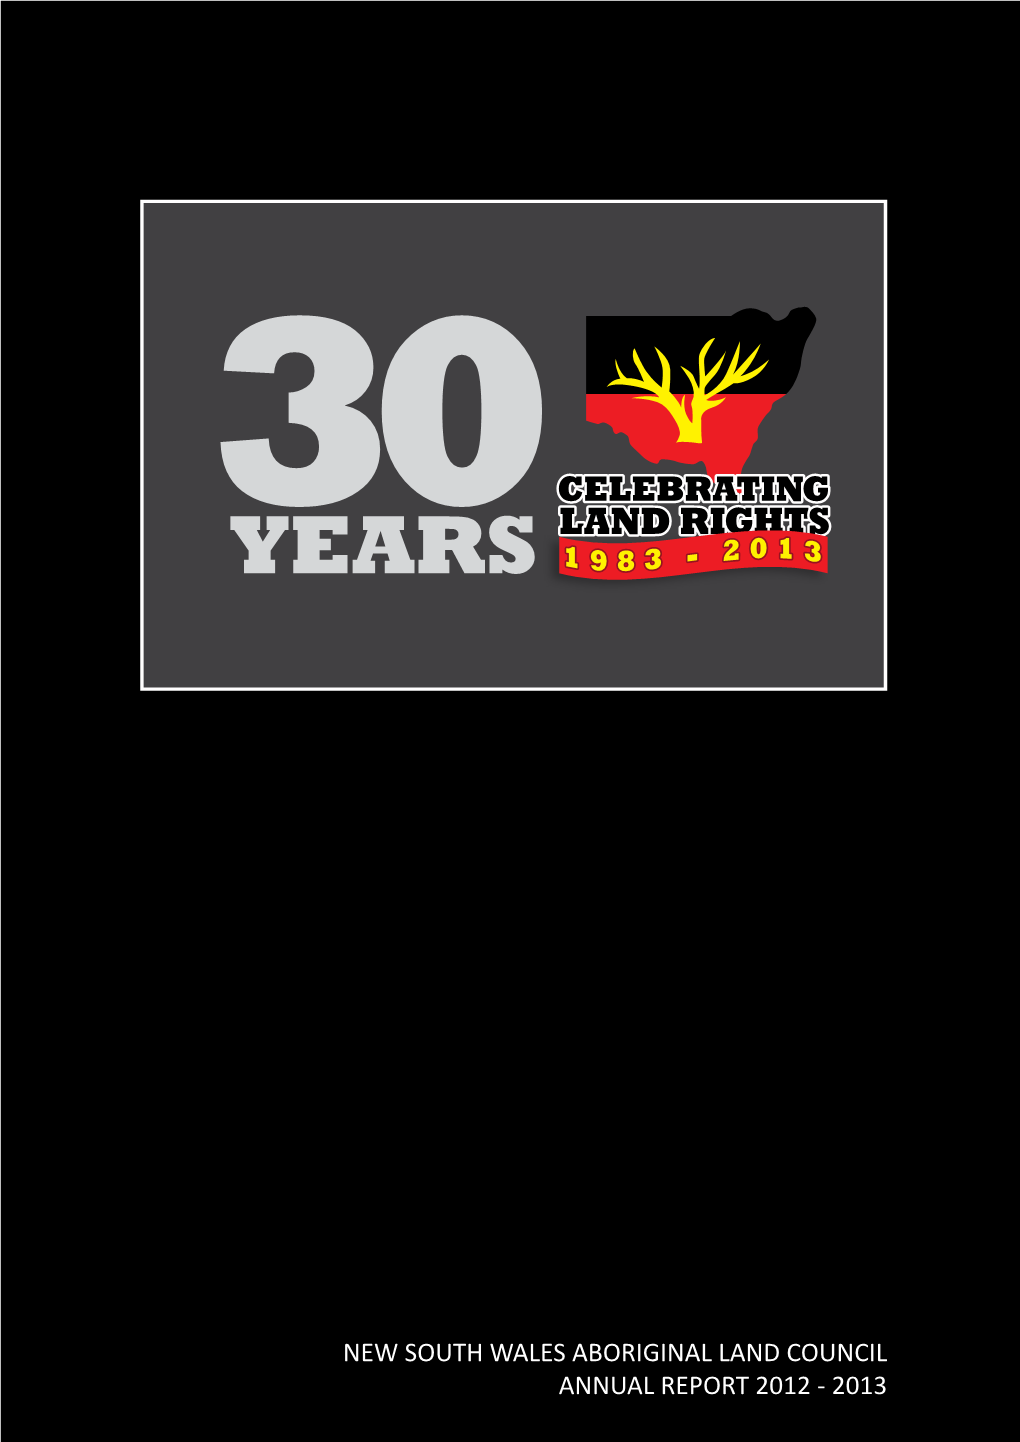 NEW SOUTH WALES ABORIGINAL LAND COUNCIL ANNUAL REPORT 2012 - 2013 Contents